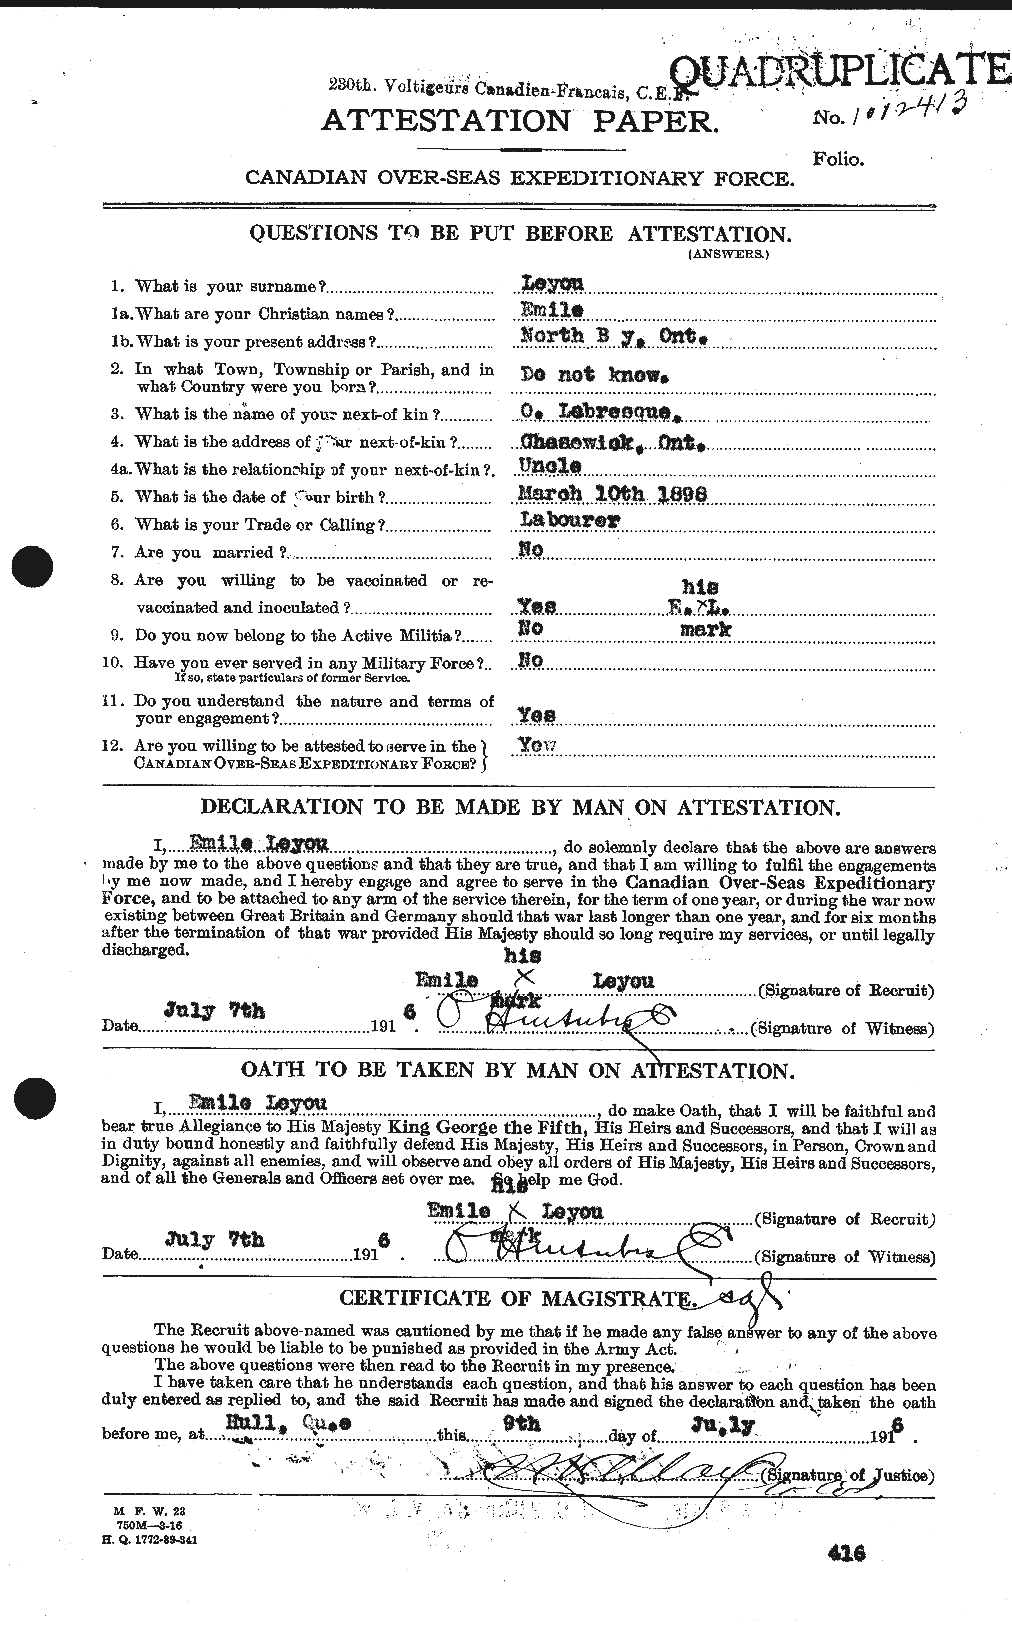 Personnel Records of the First World War - CEF 466954a